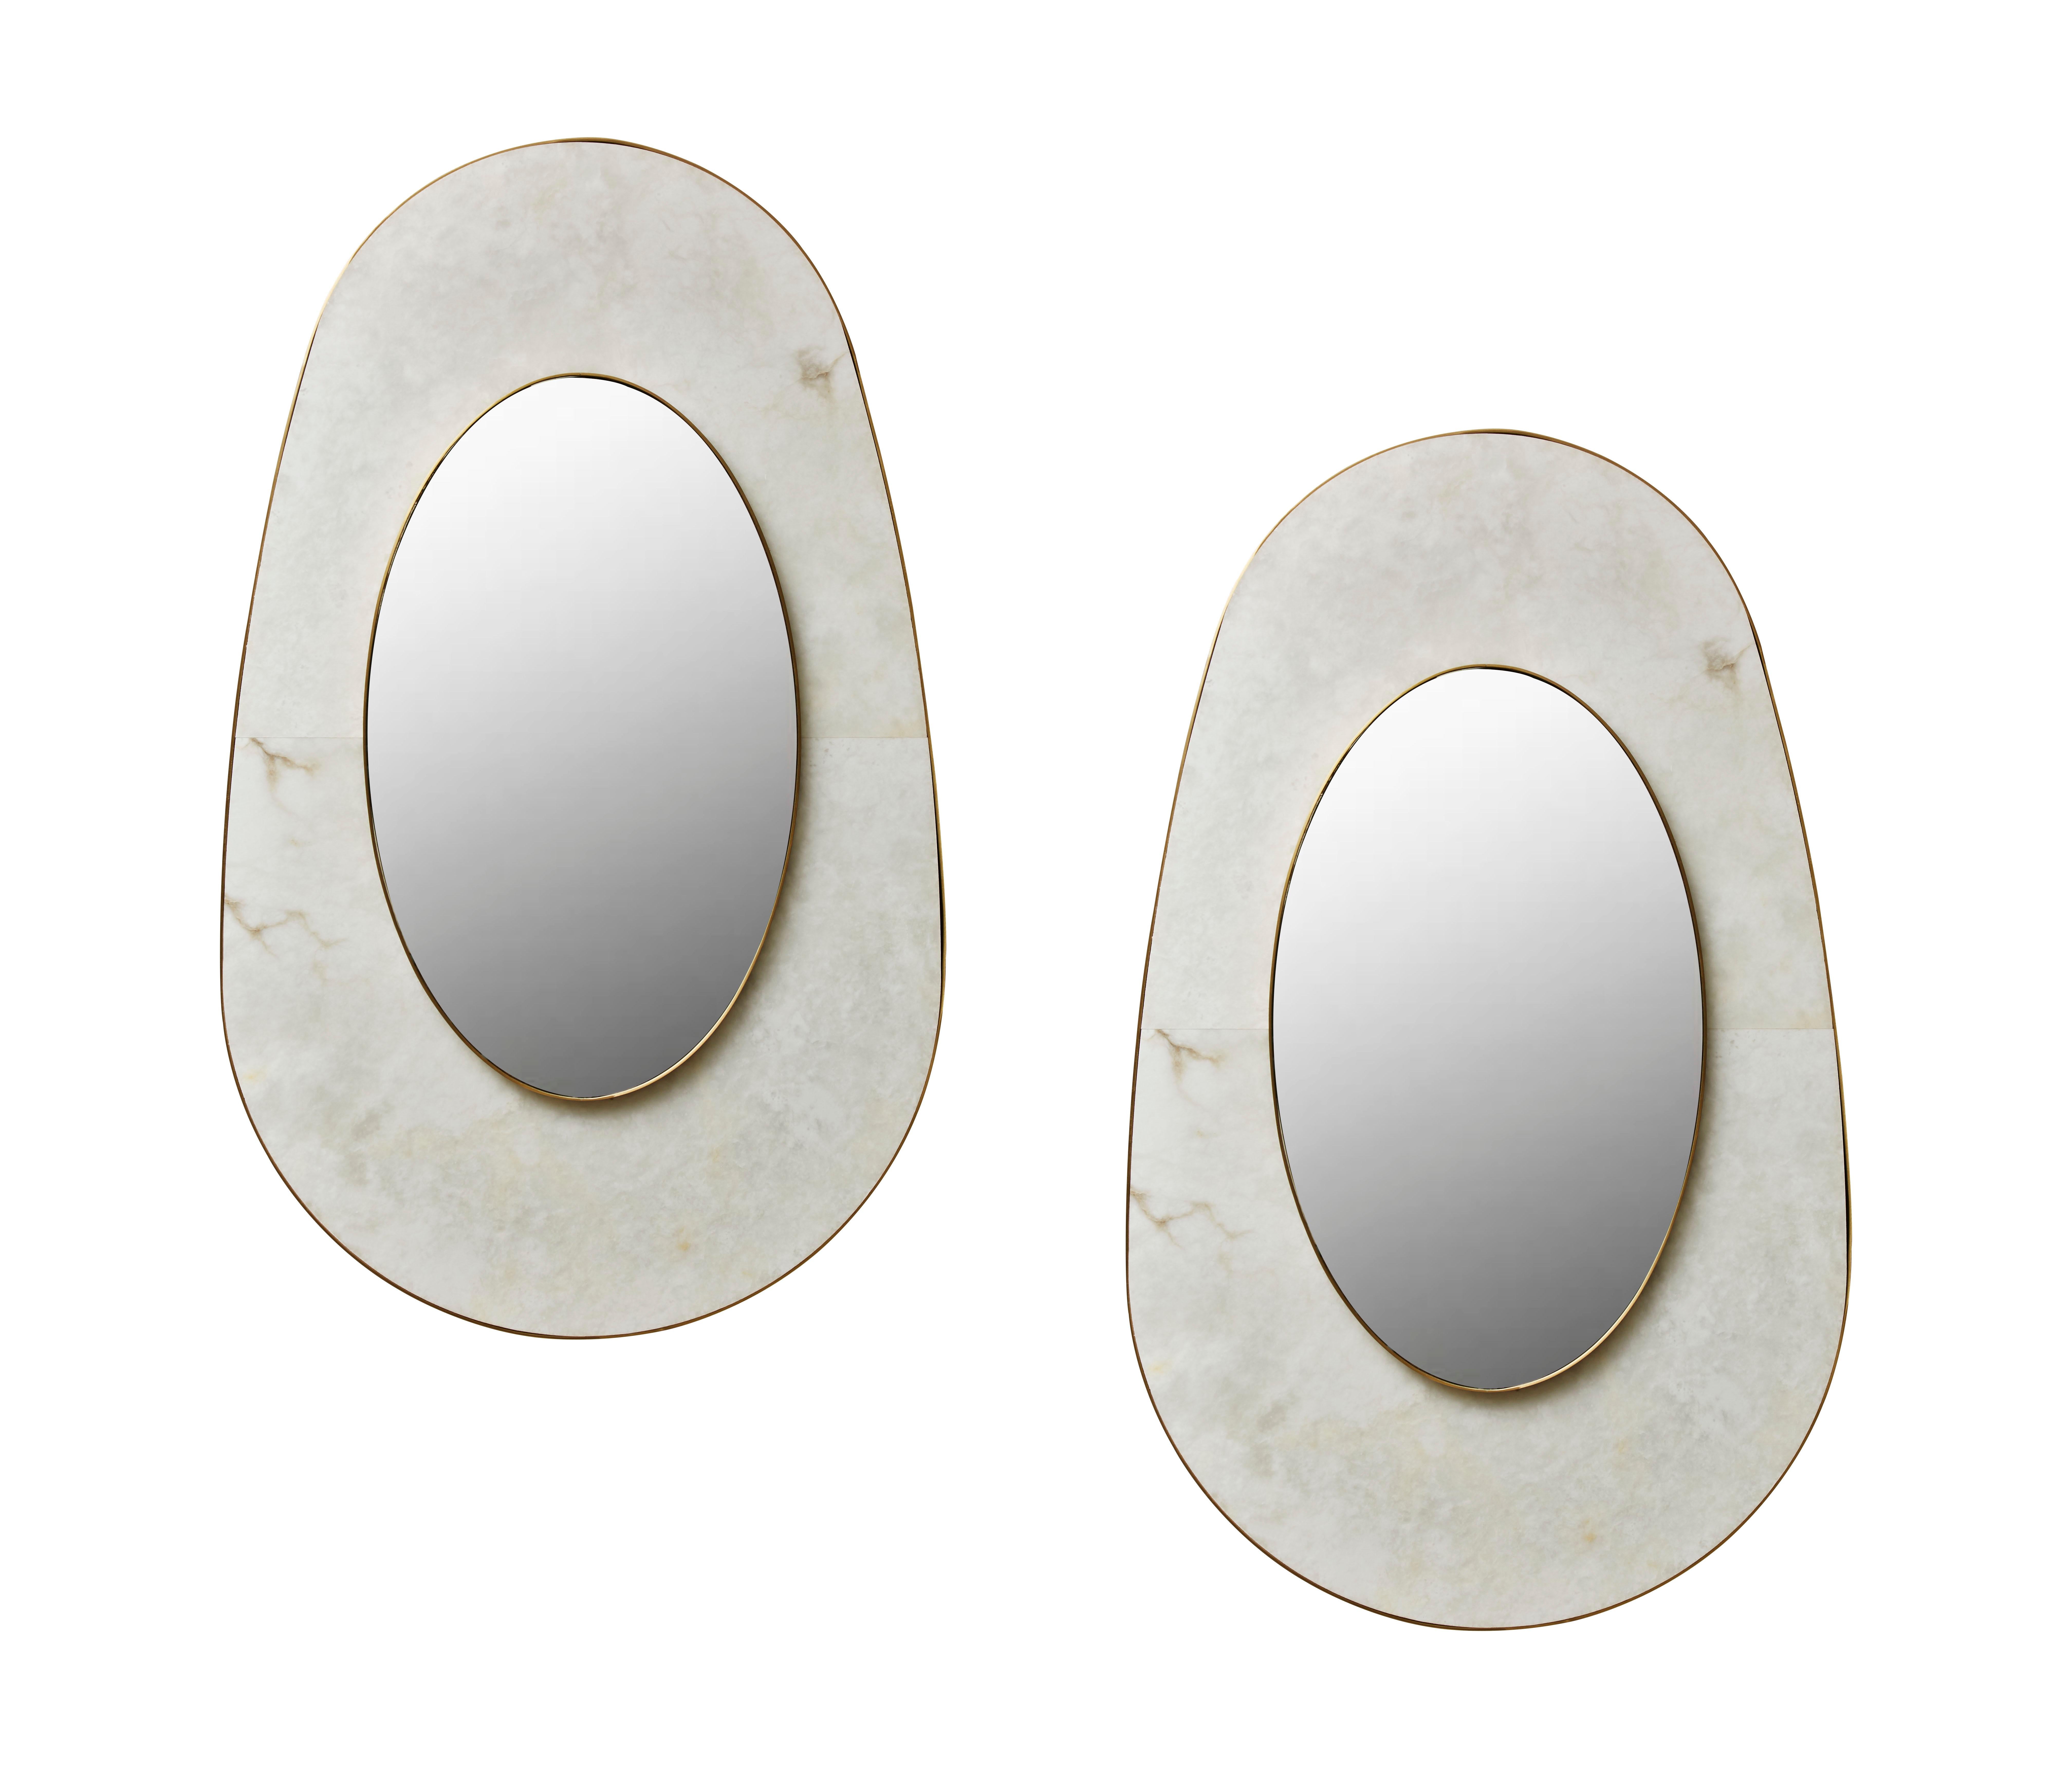 Gorgeous free-shaped mirror in alabaster and brass. Beveled mirror. 
Pair available. Creation by Studio Glustin.